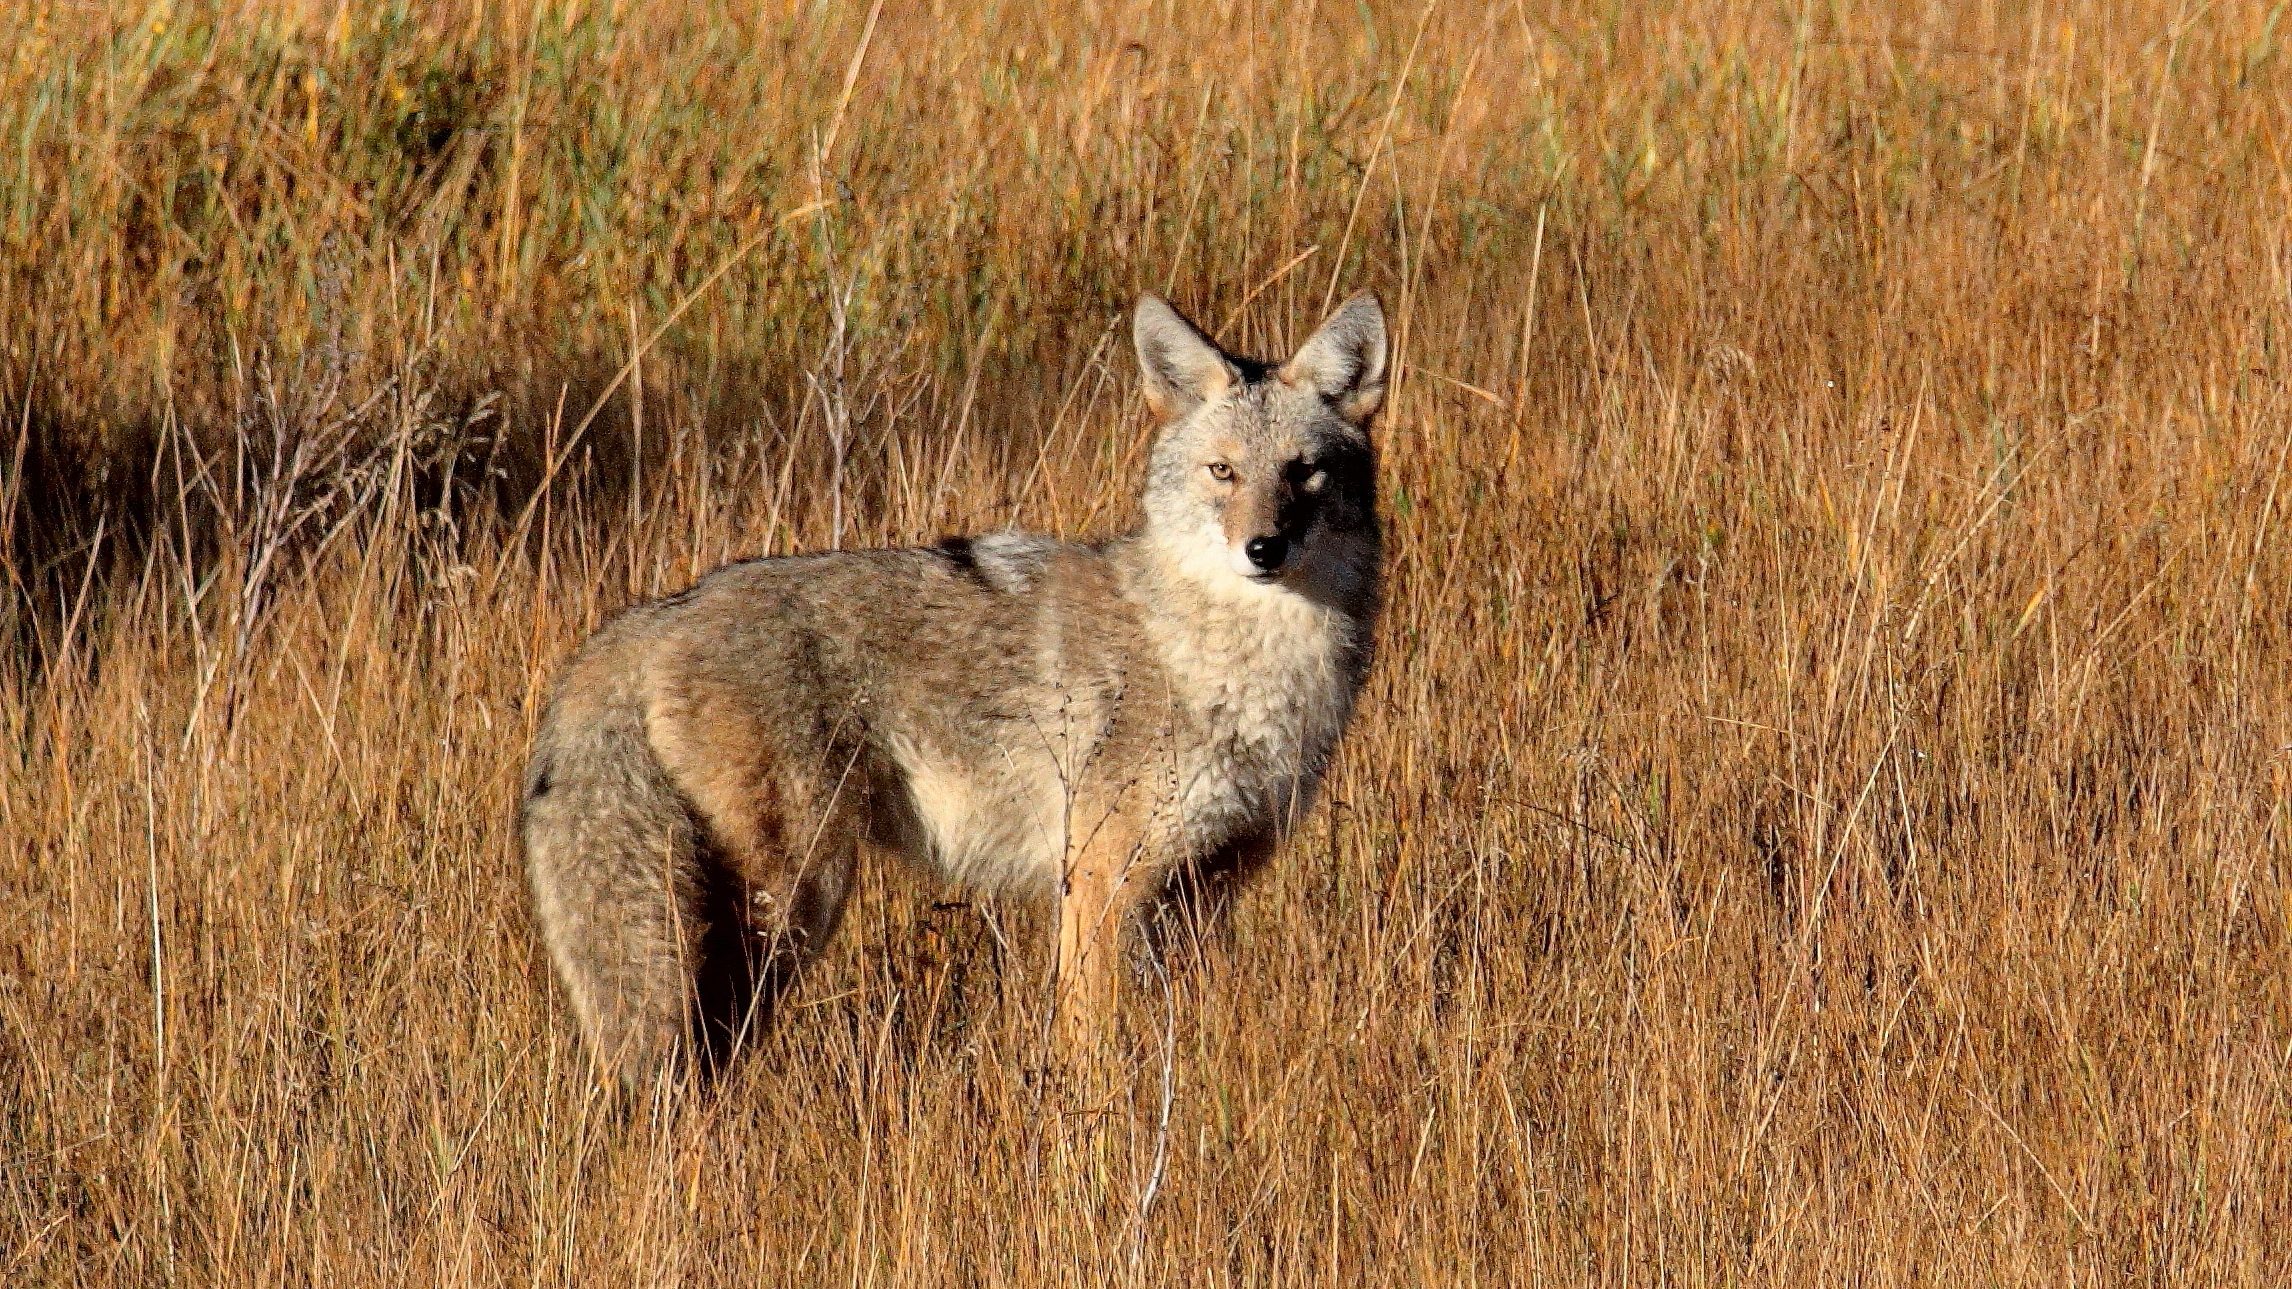 a coyote standing in long brown grass looking at the camera